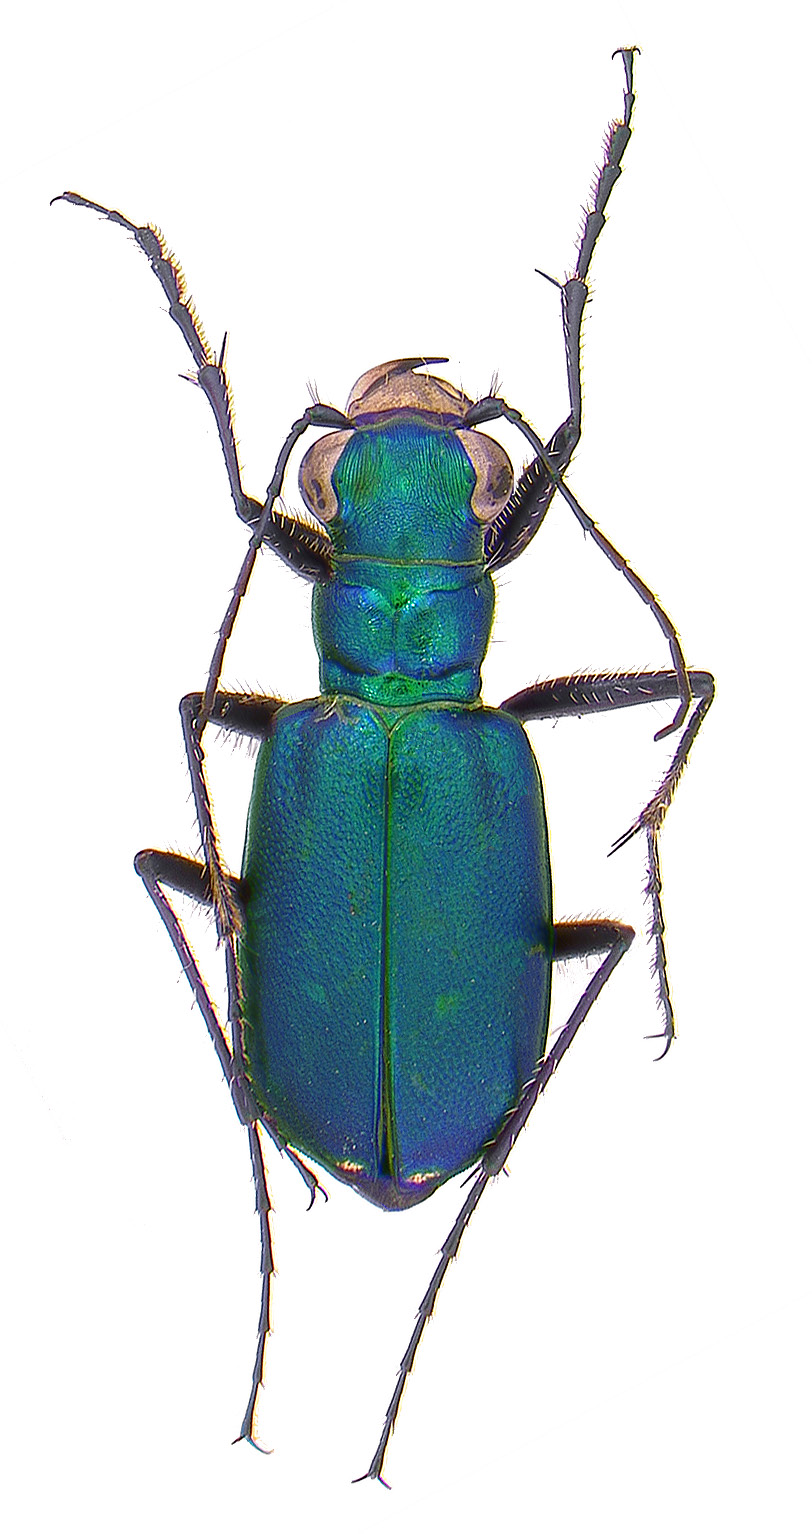 #8 Six spotted tiger beetle